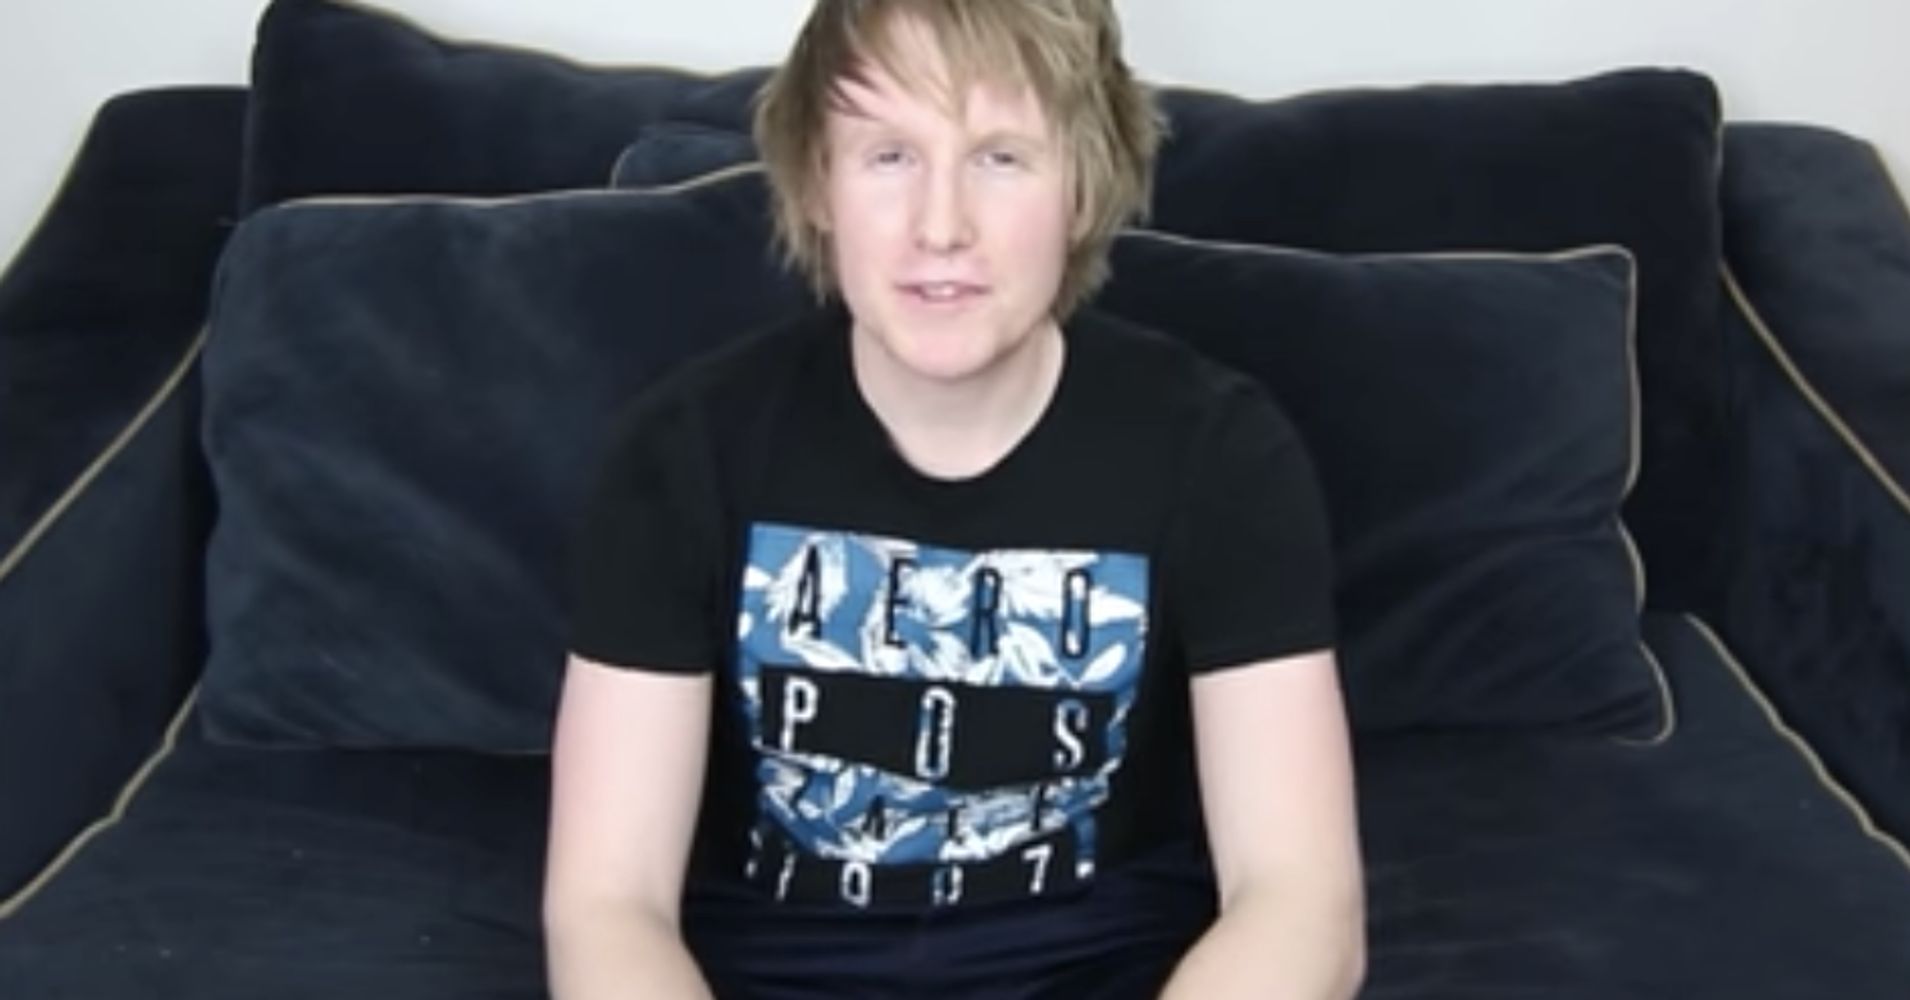 YouTube Star BryanStars Comes Out As Gay In Emotional Video HuffPost